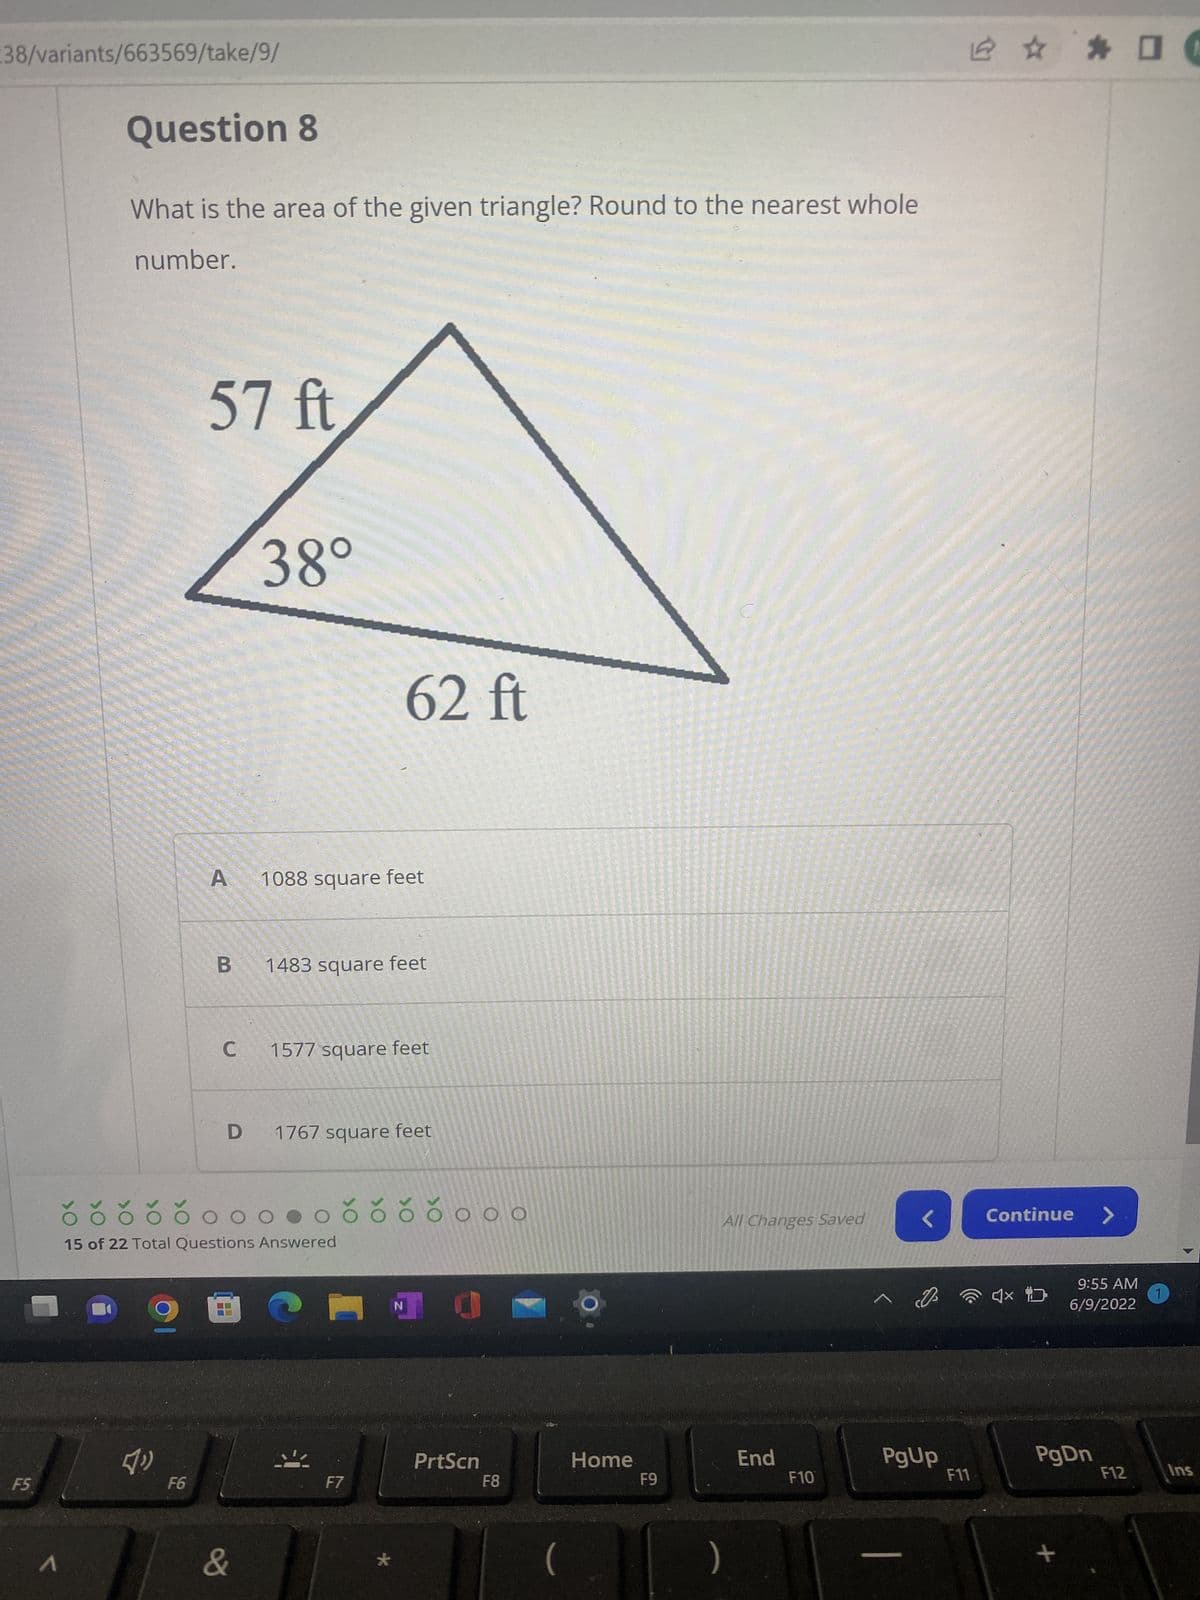 ### Question 8
**What is the area of the given triangle? Round to the nearest whole number.**

A triangle is provided with the following measurements:
- One side is labeled as 57 feet
- Another side is labeled as 62 feet
- An angle between these two sides is labeled as 38°

#### Answer Choices:
A. 1088 square feet  
B. 1483 square feet  
C. 1577 square feet  
D. 1767 square feet  

#### Solution:
To find the area of a triangle when two sides and the included angle are known, use the formula:
\[ \text{Area} = \frac{1}{2}ab\sin(C) \]
Where:
- \( a \) and \( b \) are the lengths of the two sides
- \( C \) is the included angle

Substitute the given values:
\[ a = 57 \, \text{ft}, b = 62 \, \text{ft}, \text{and } C = 38^\circ \]
\[ \text{Area} = \frac{1}{2} \times 57 \times 62 \times \sin(38^\circ) \]

By calculating the sine of 38 degrees and solving,
\[ \sin(38^\circ) \approx 0.6157 \]
\[ \text{Area} \approx \frac{1}{2} \times 57 \times 62 \times 0.6157 \]
\[ \text{Area} \approx 1087.76 \, \text{square feet} \]

Rounded to the nearest whole number,
\[ \text{Area} \approx 1088 \, \text{square feet} \]

So, the correct answer is:
**A. 1088 square feet**